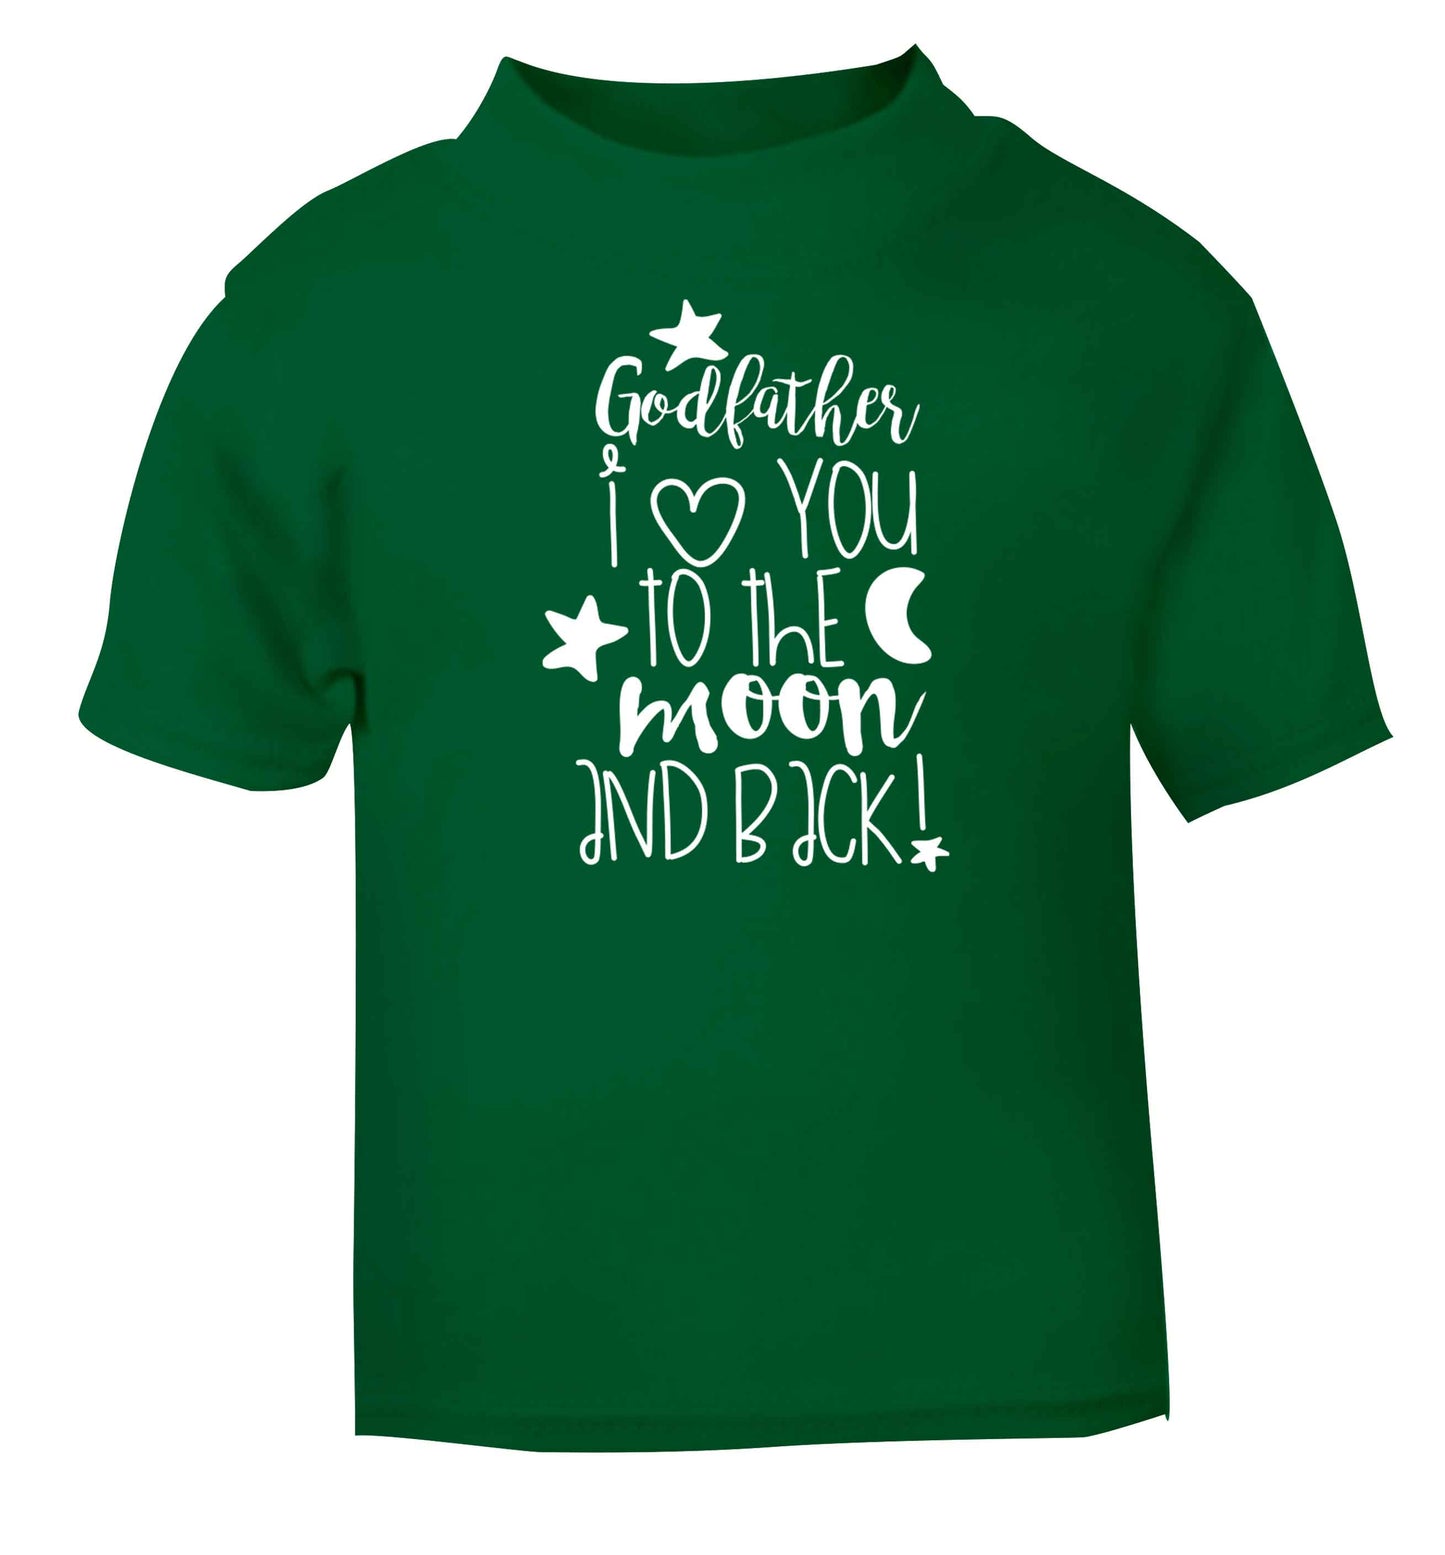 Godfather I love you to the moon and back green baby toddler Tshirt 2 Years